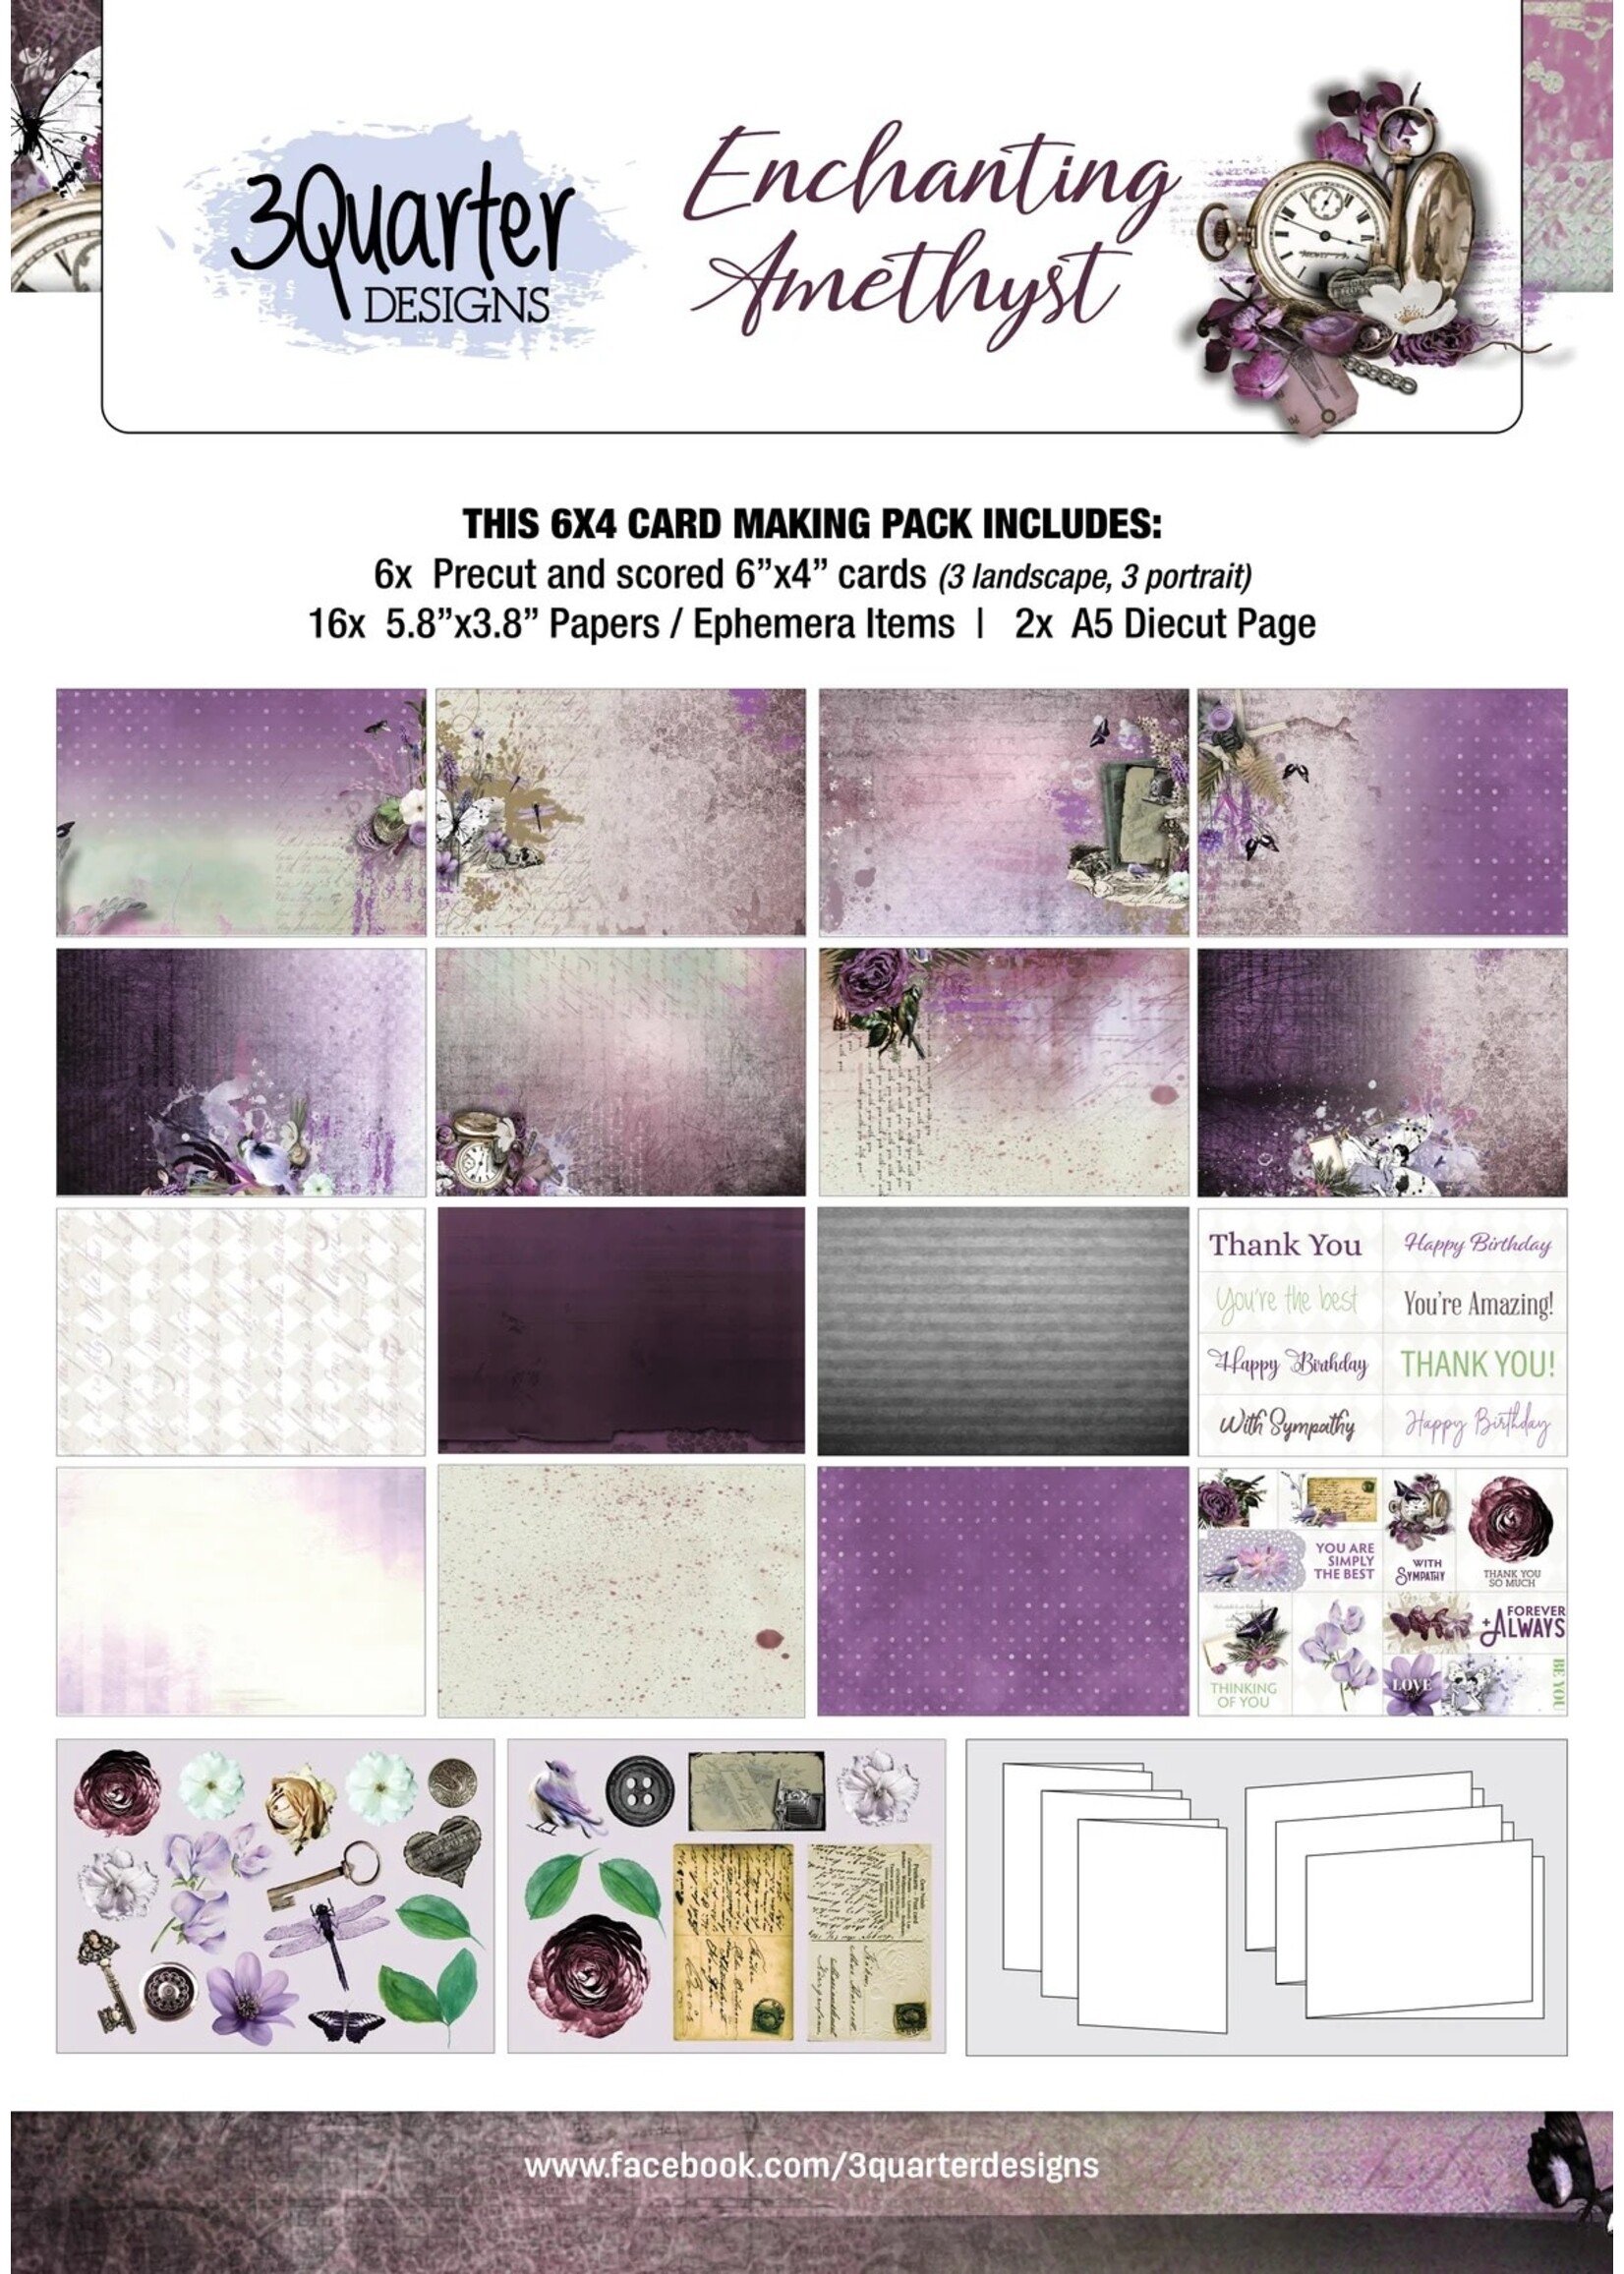 3Quarter Designs Enchanted Amethyst Card Collection